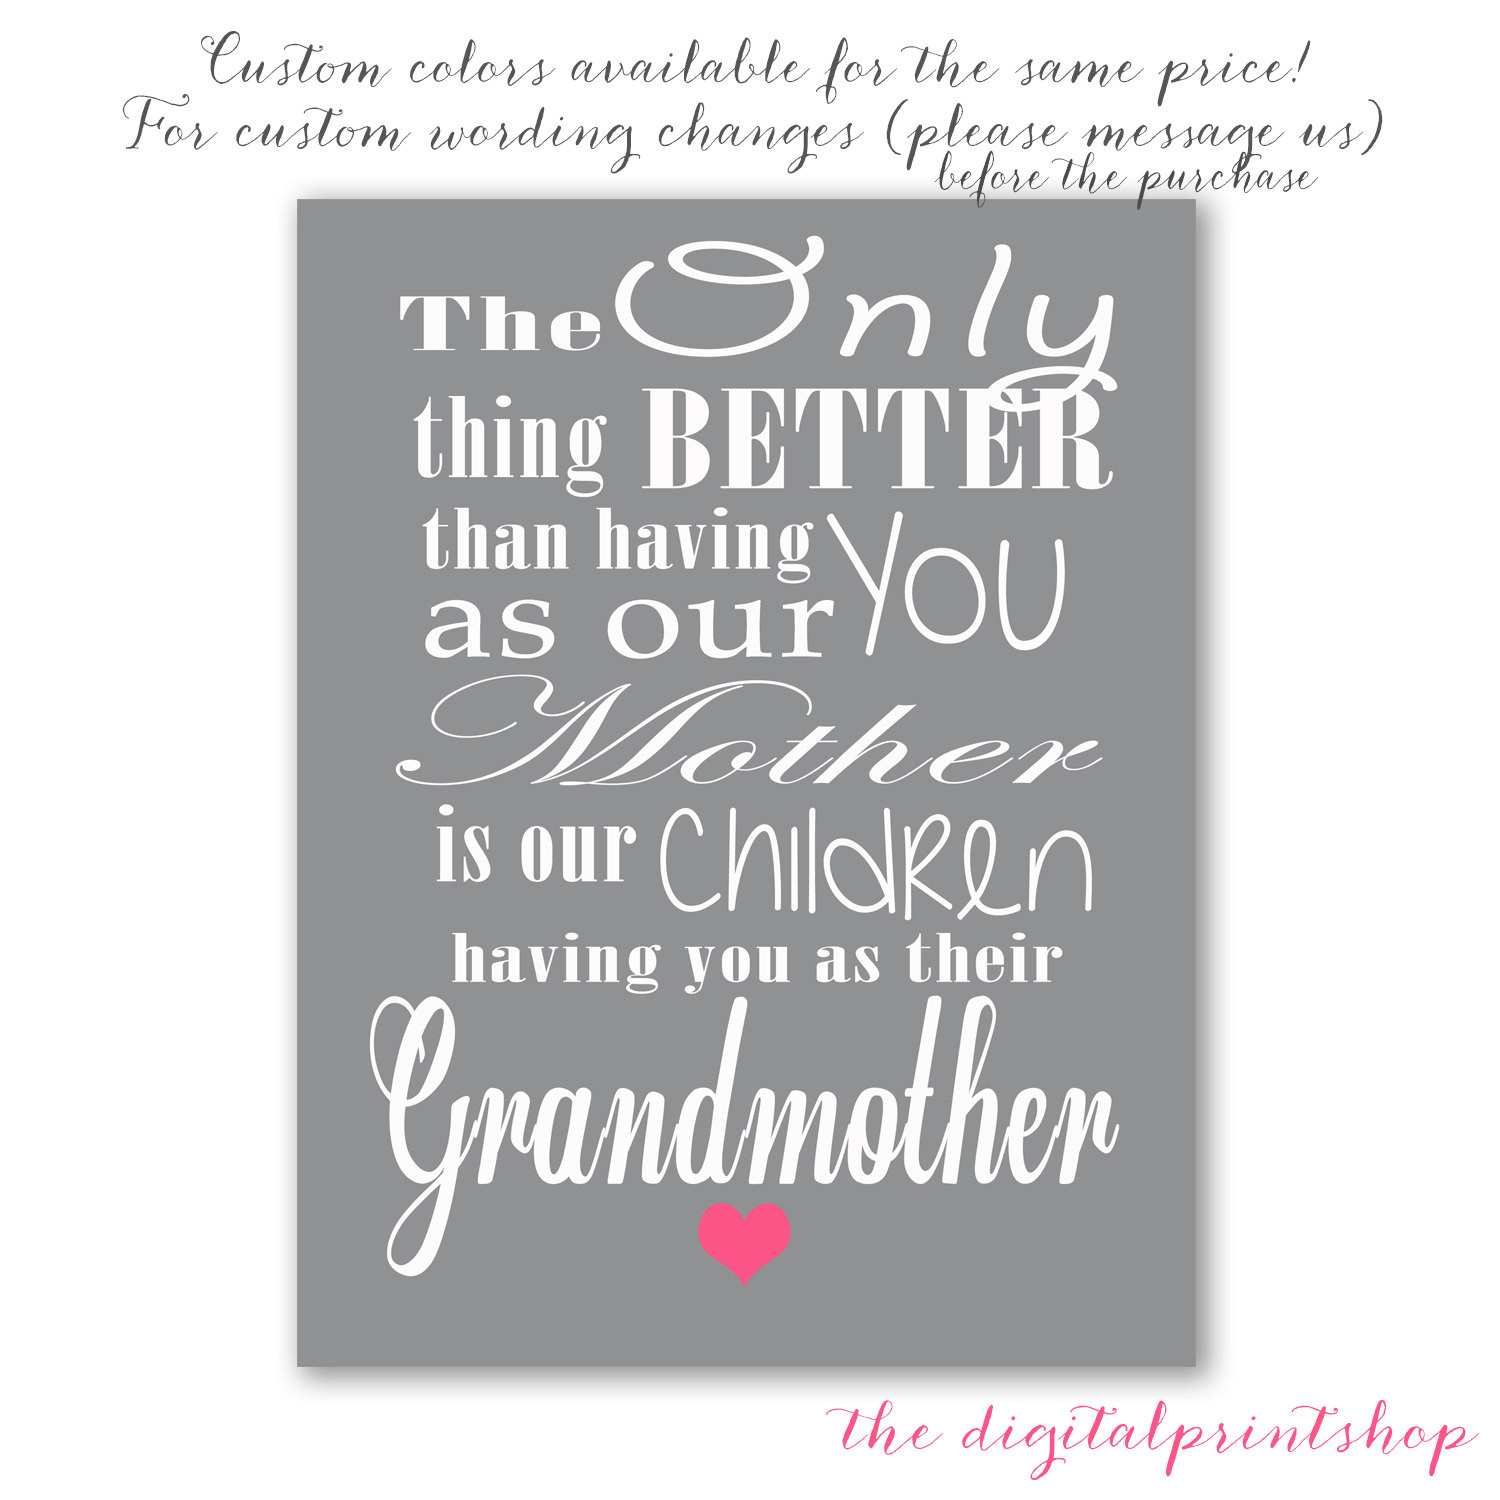 Grandmother Granddaughter Quotes
 Mothers Day Quotes For Grandma From Granddaughter QuotesGram